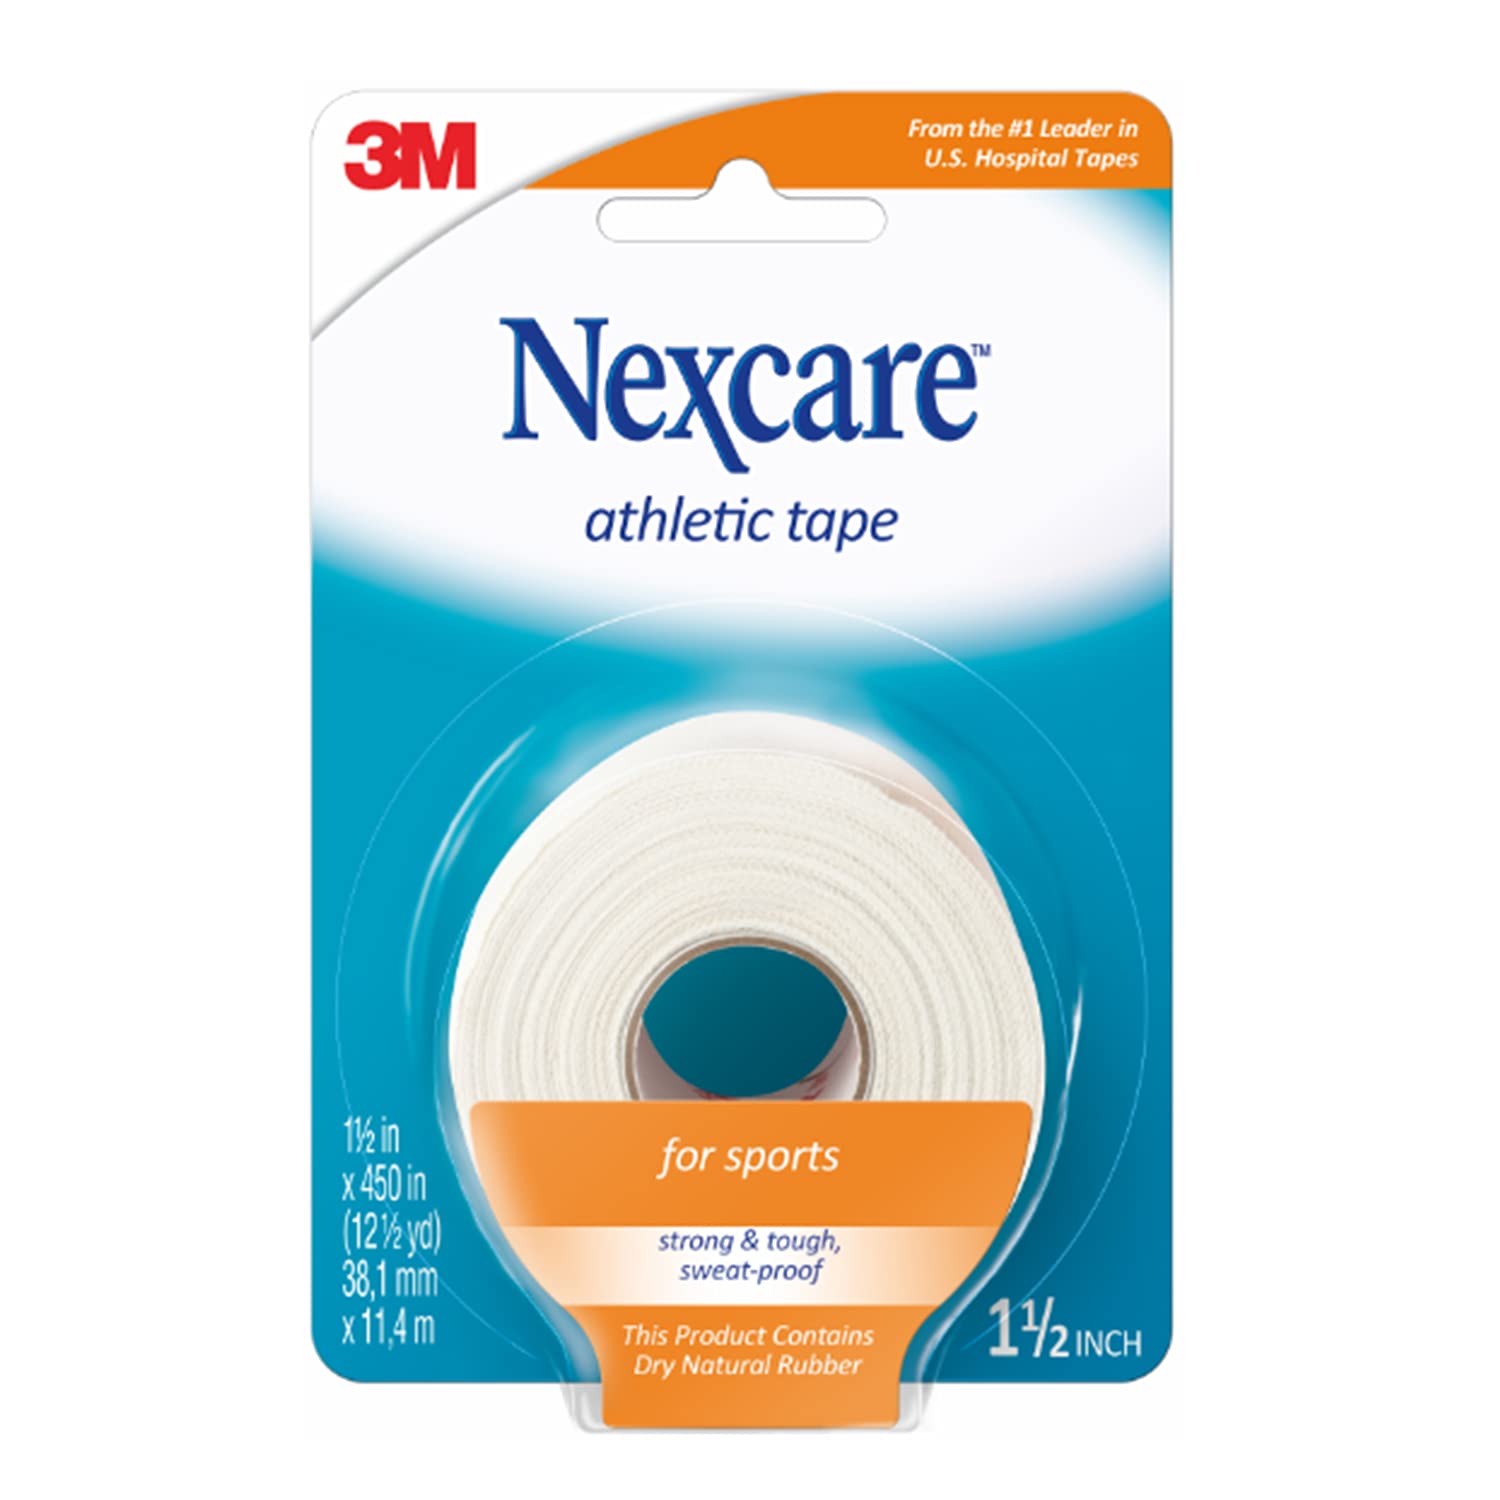 Nexcare Athletic Cloth Tape, Tears Easily, For All-Purpose Athletic Use, 1 Roll